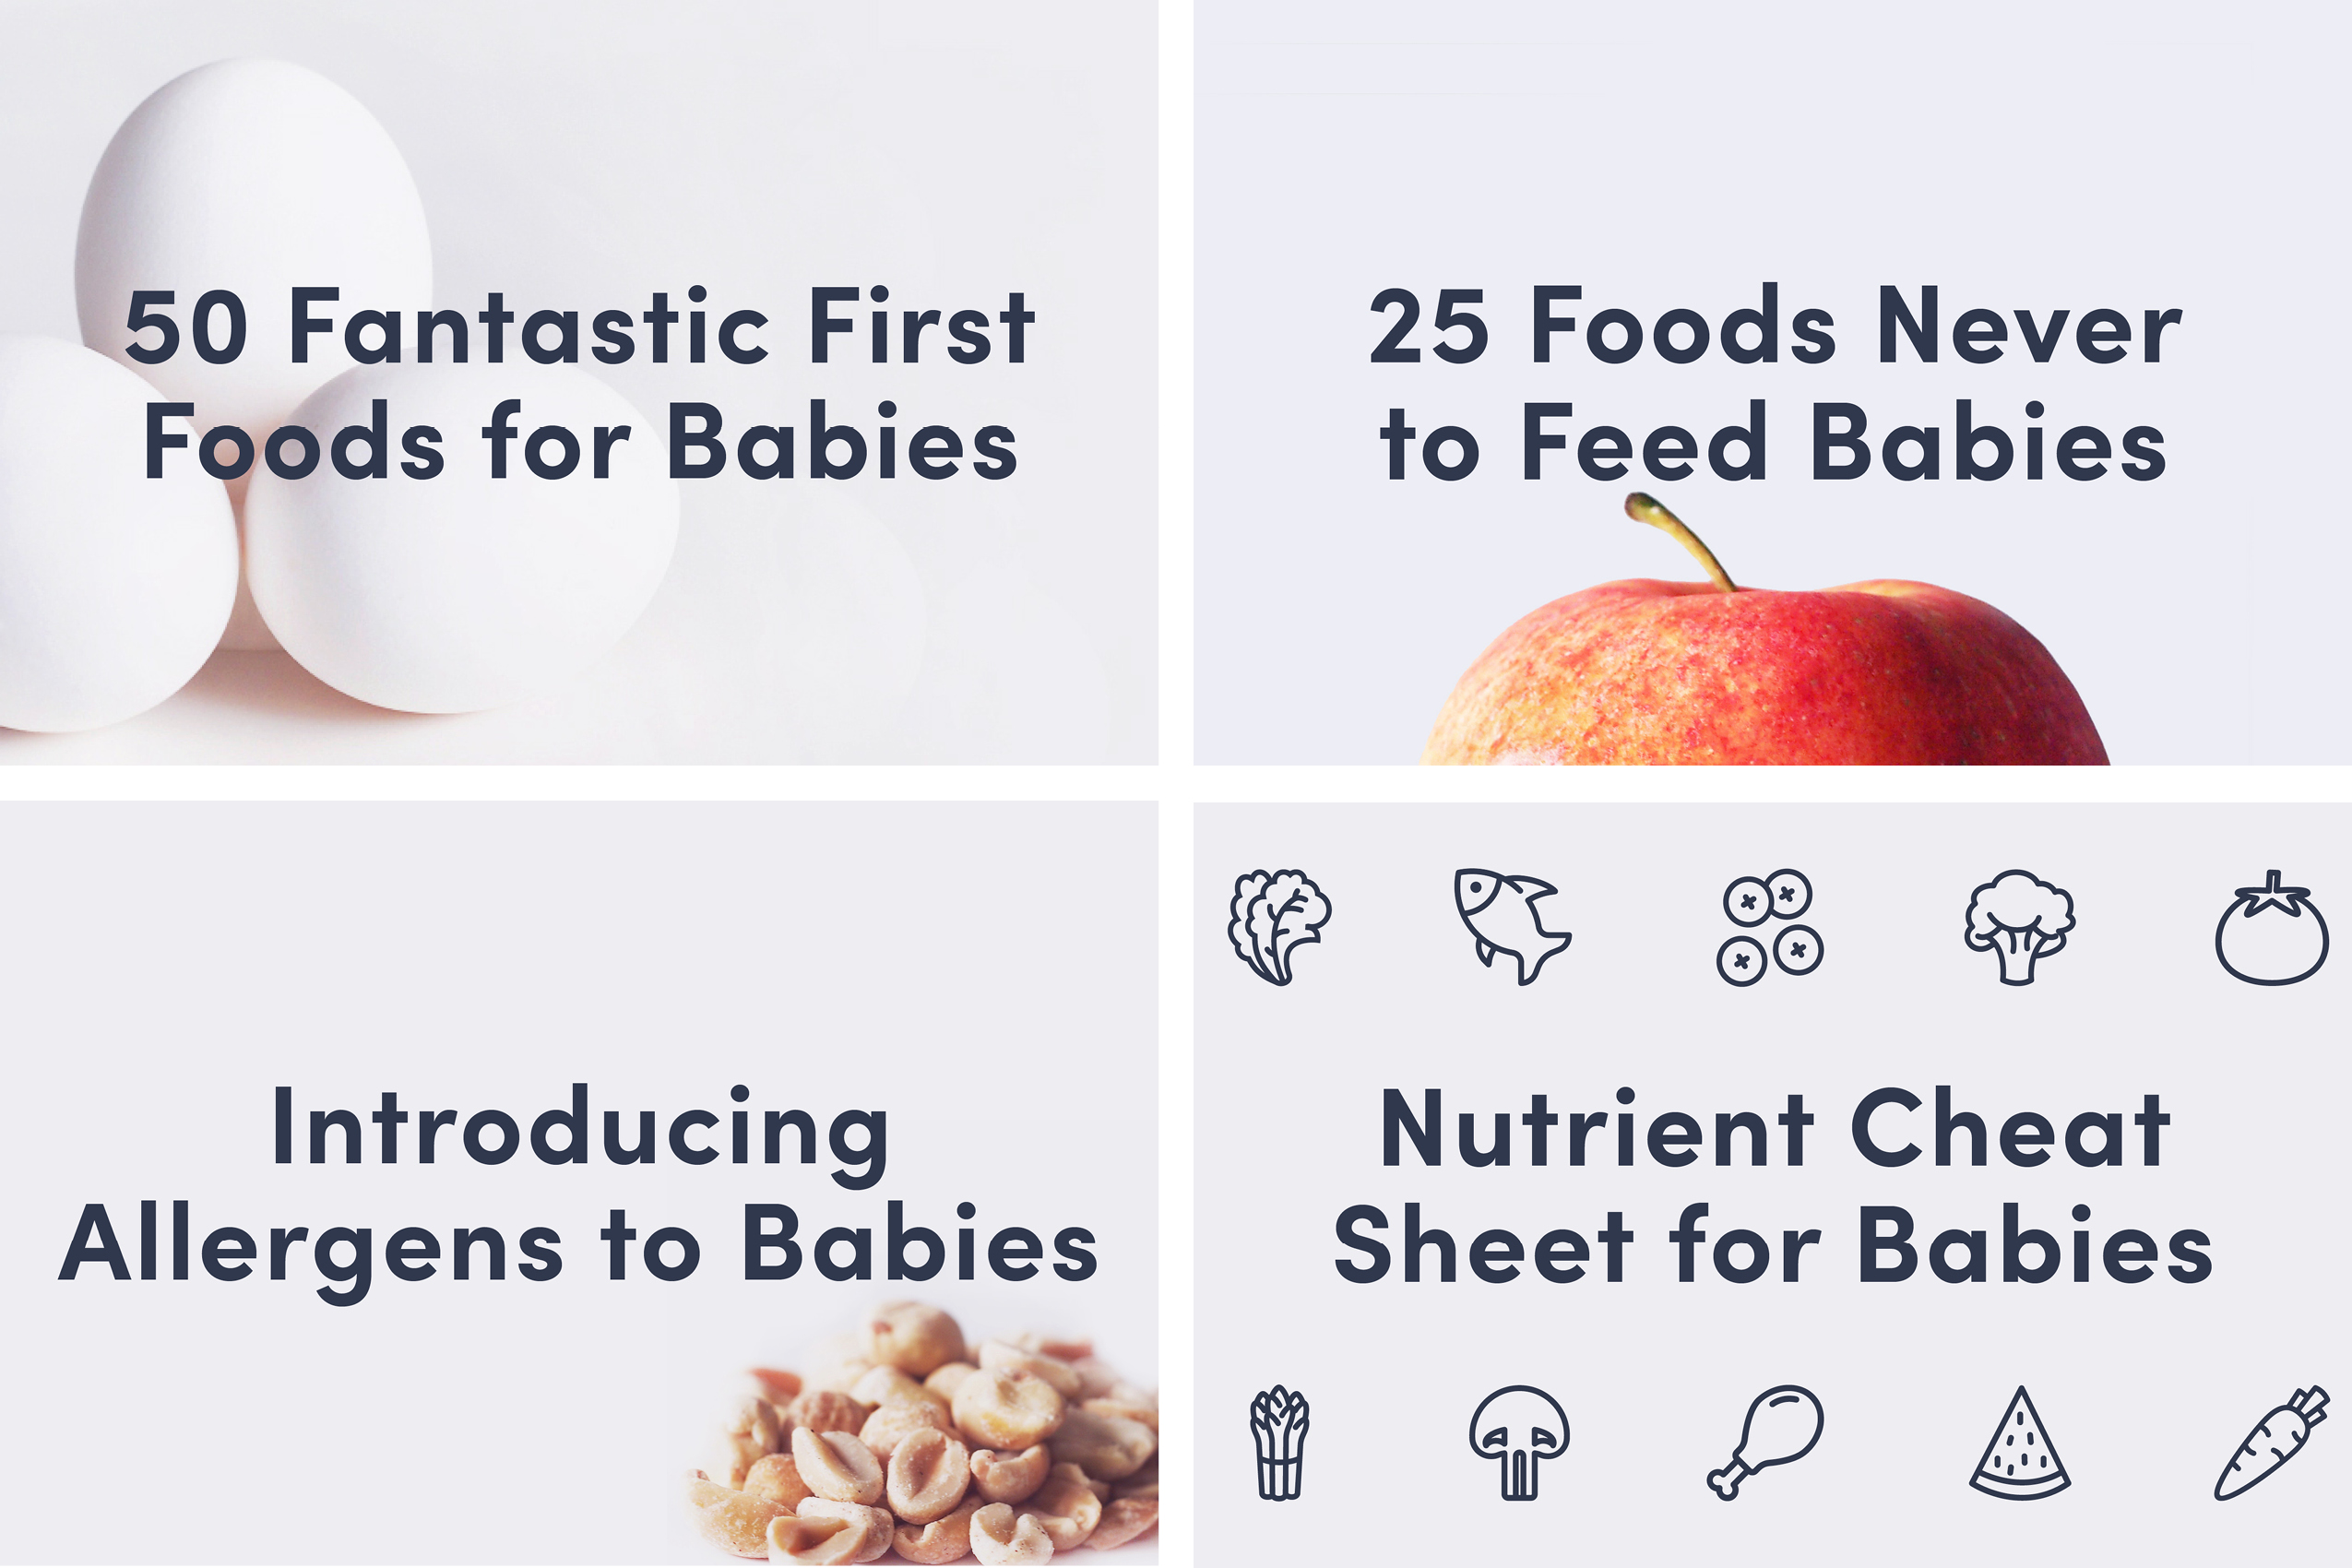 First Foods - Guides for Baby's First Foods Solid Starts